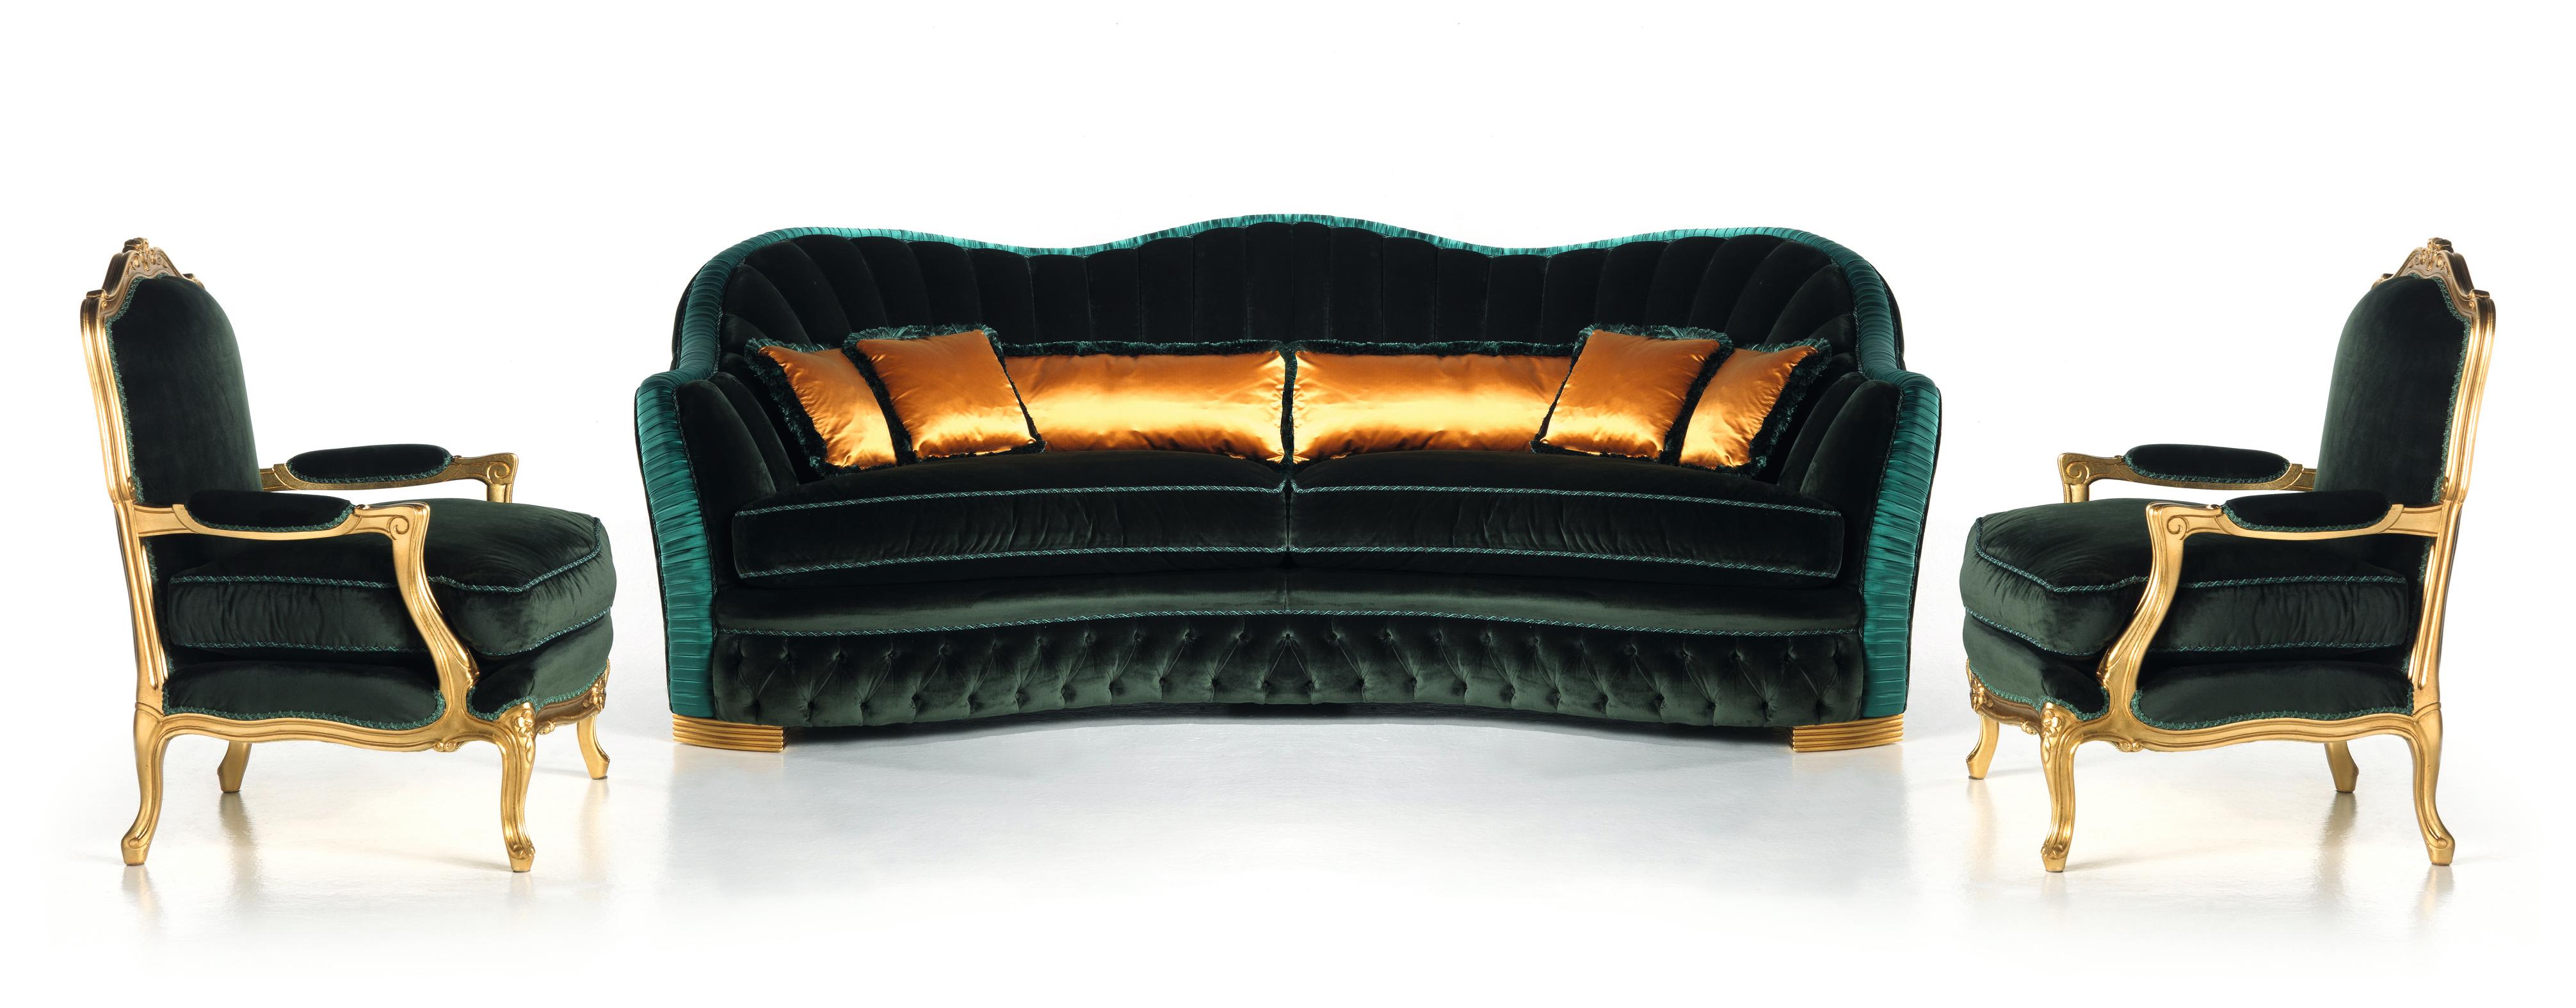 The Smeraldo sofa is a seat of modern classicism, designed to
live comfortly and elegantly the living room space. Stately model
characterized by the harmonious design of the back, that is outlined
by the handmade pleating that runs all-over the